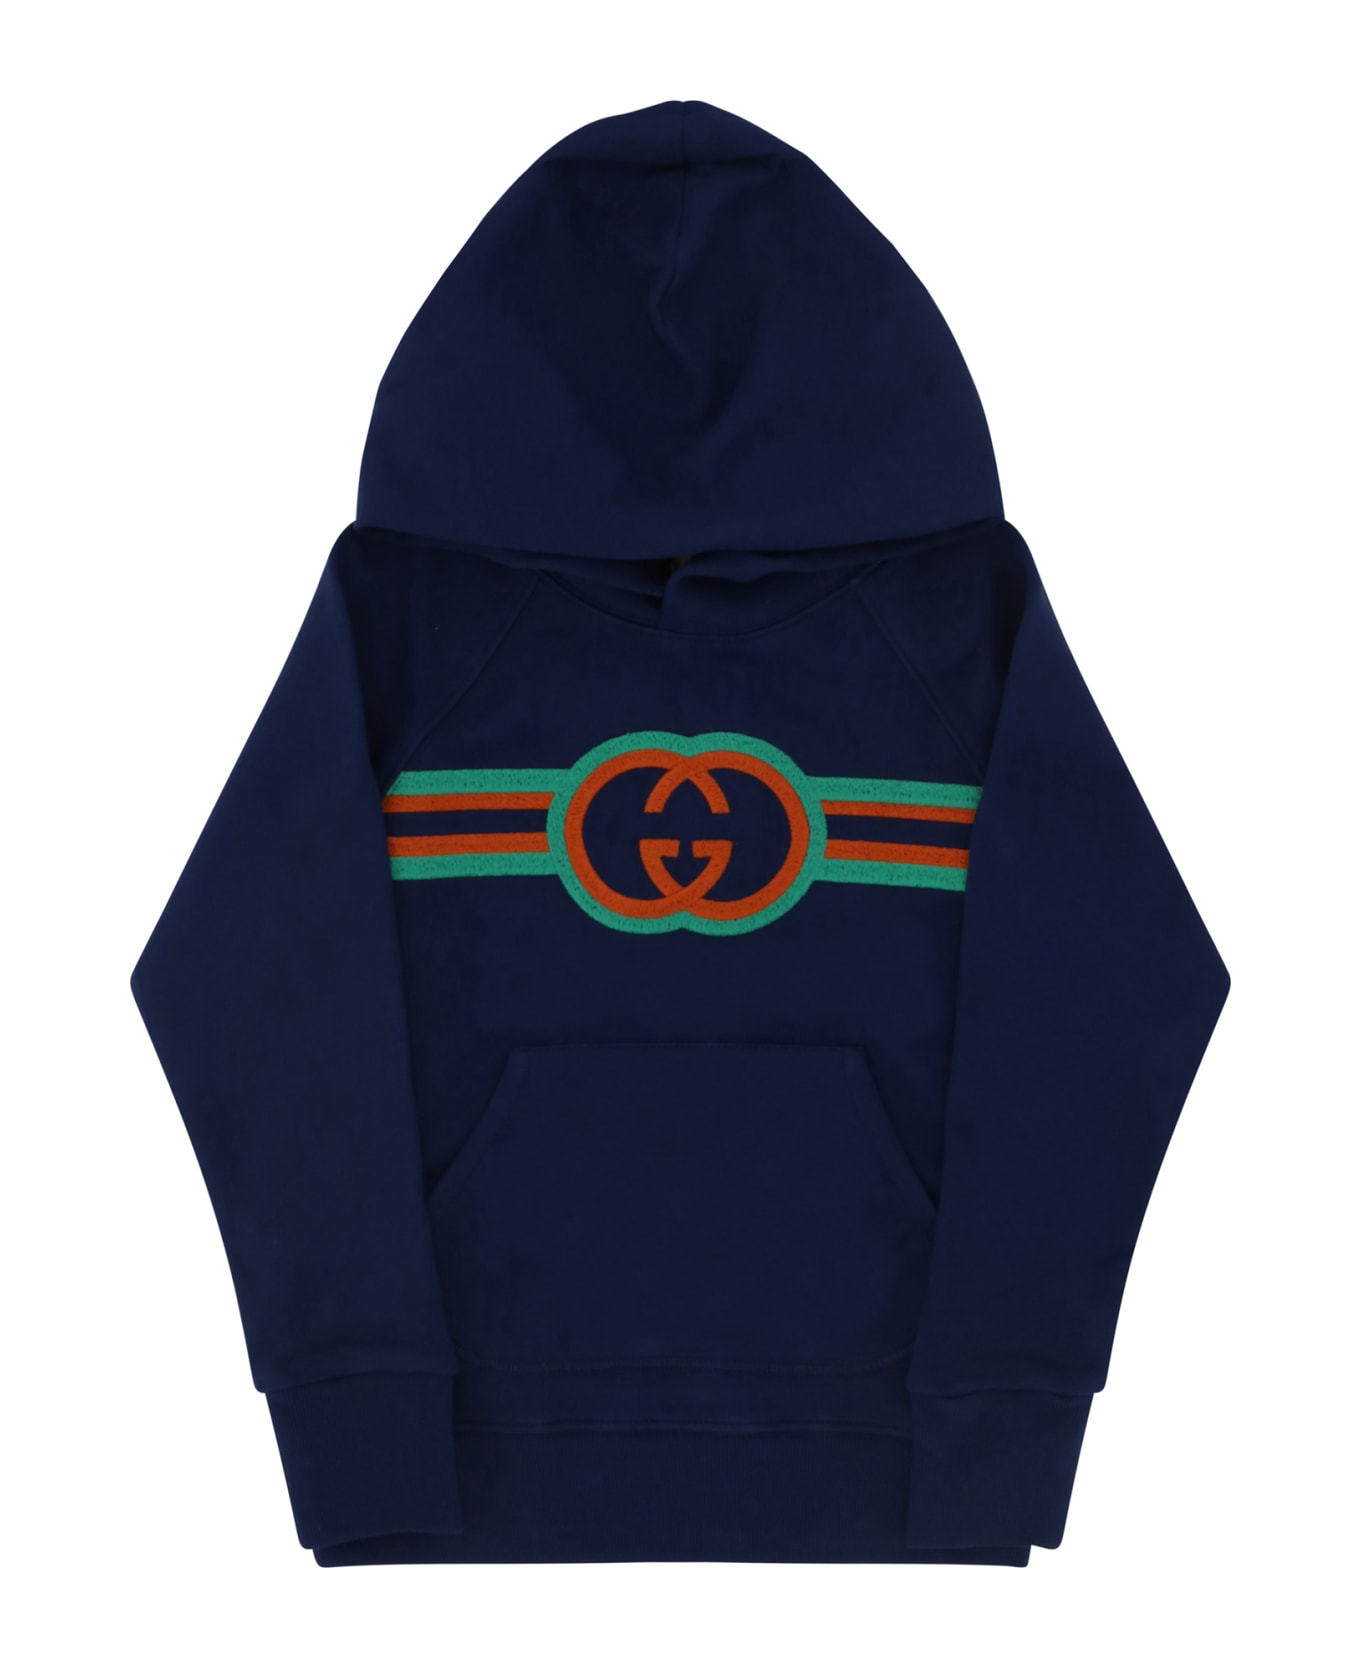 Gucci Hoodie For Boy - Blue